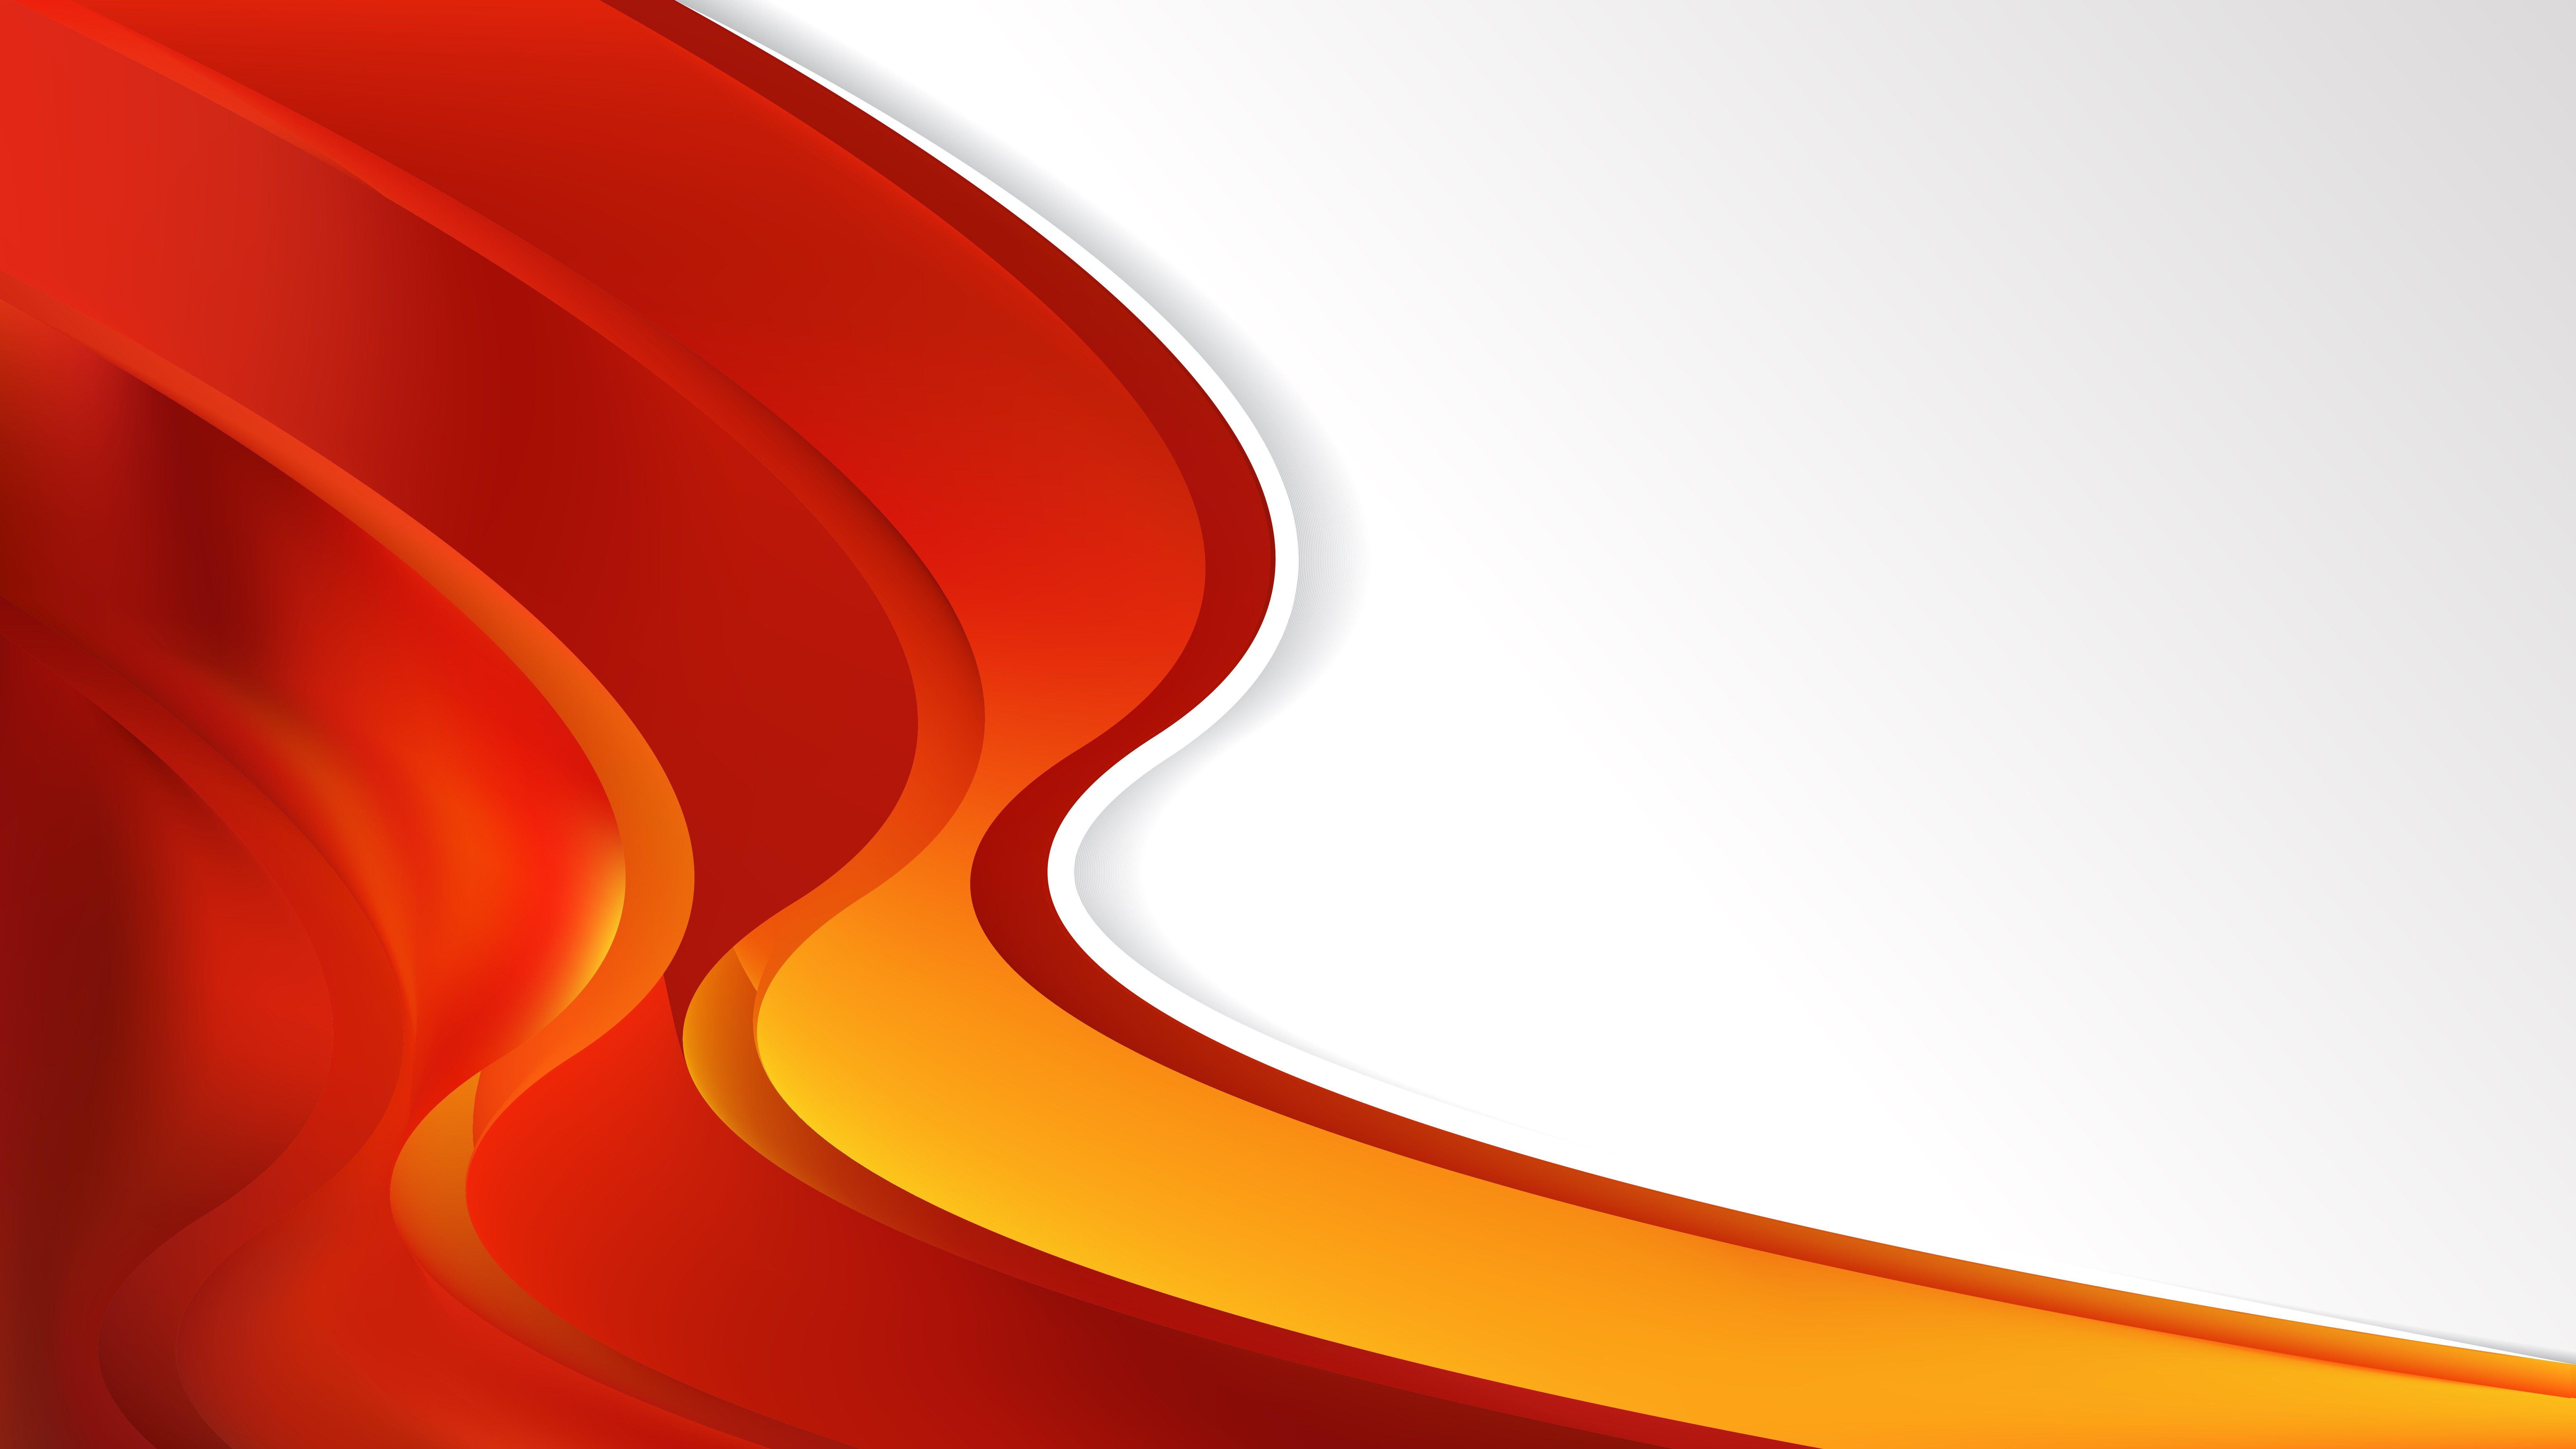 Red and Orange Wave Logo - Red and Orange Wave Business Background Vector Art